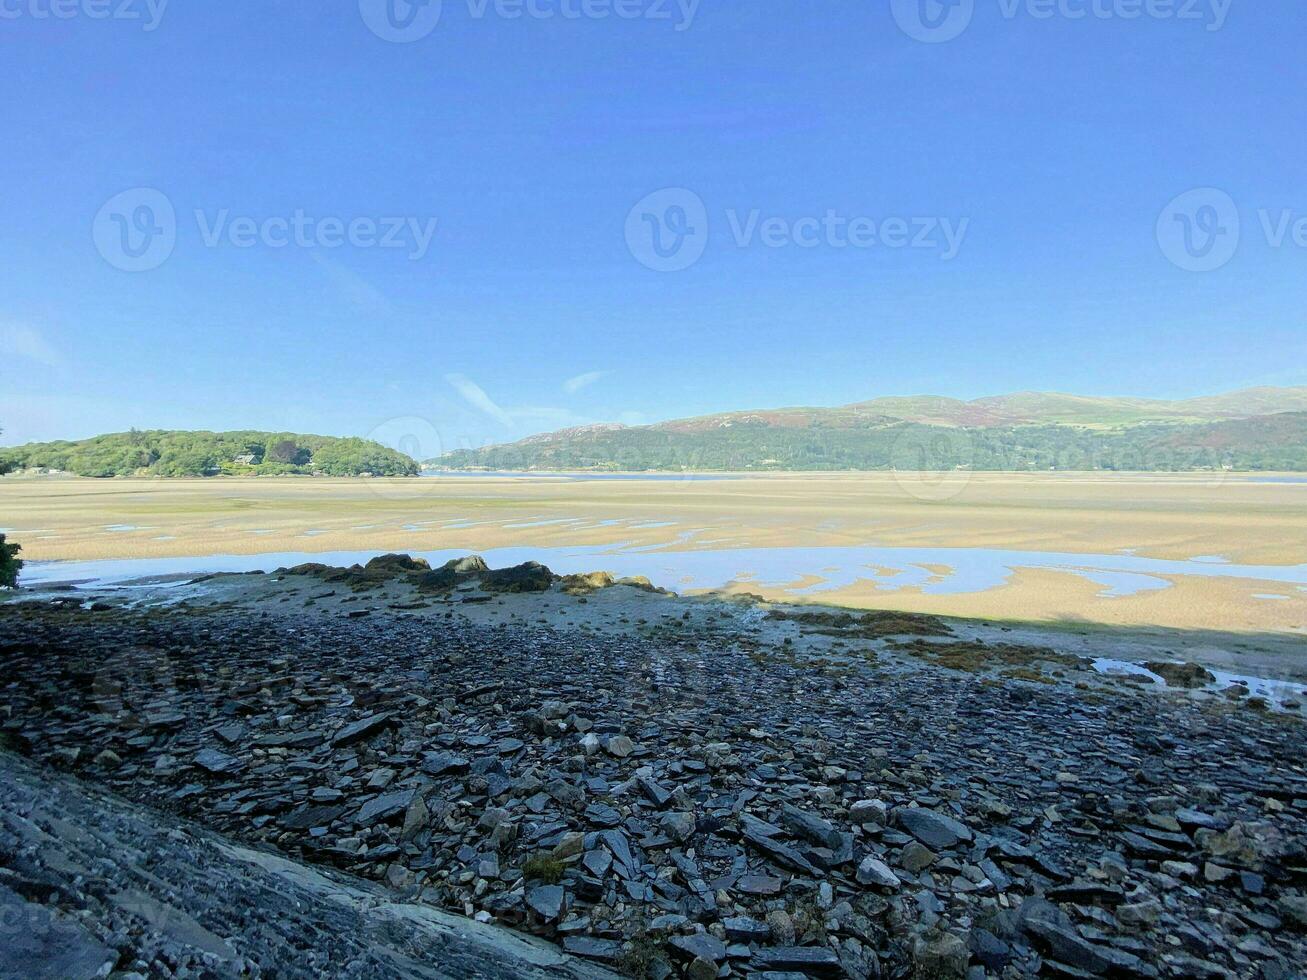 A view of the North Wales Countryside on the Mawddach Trail photo